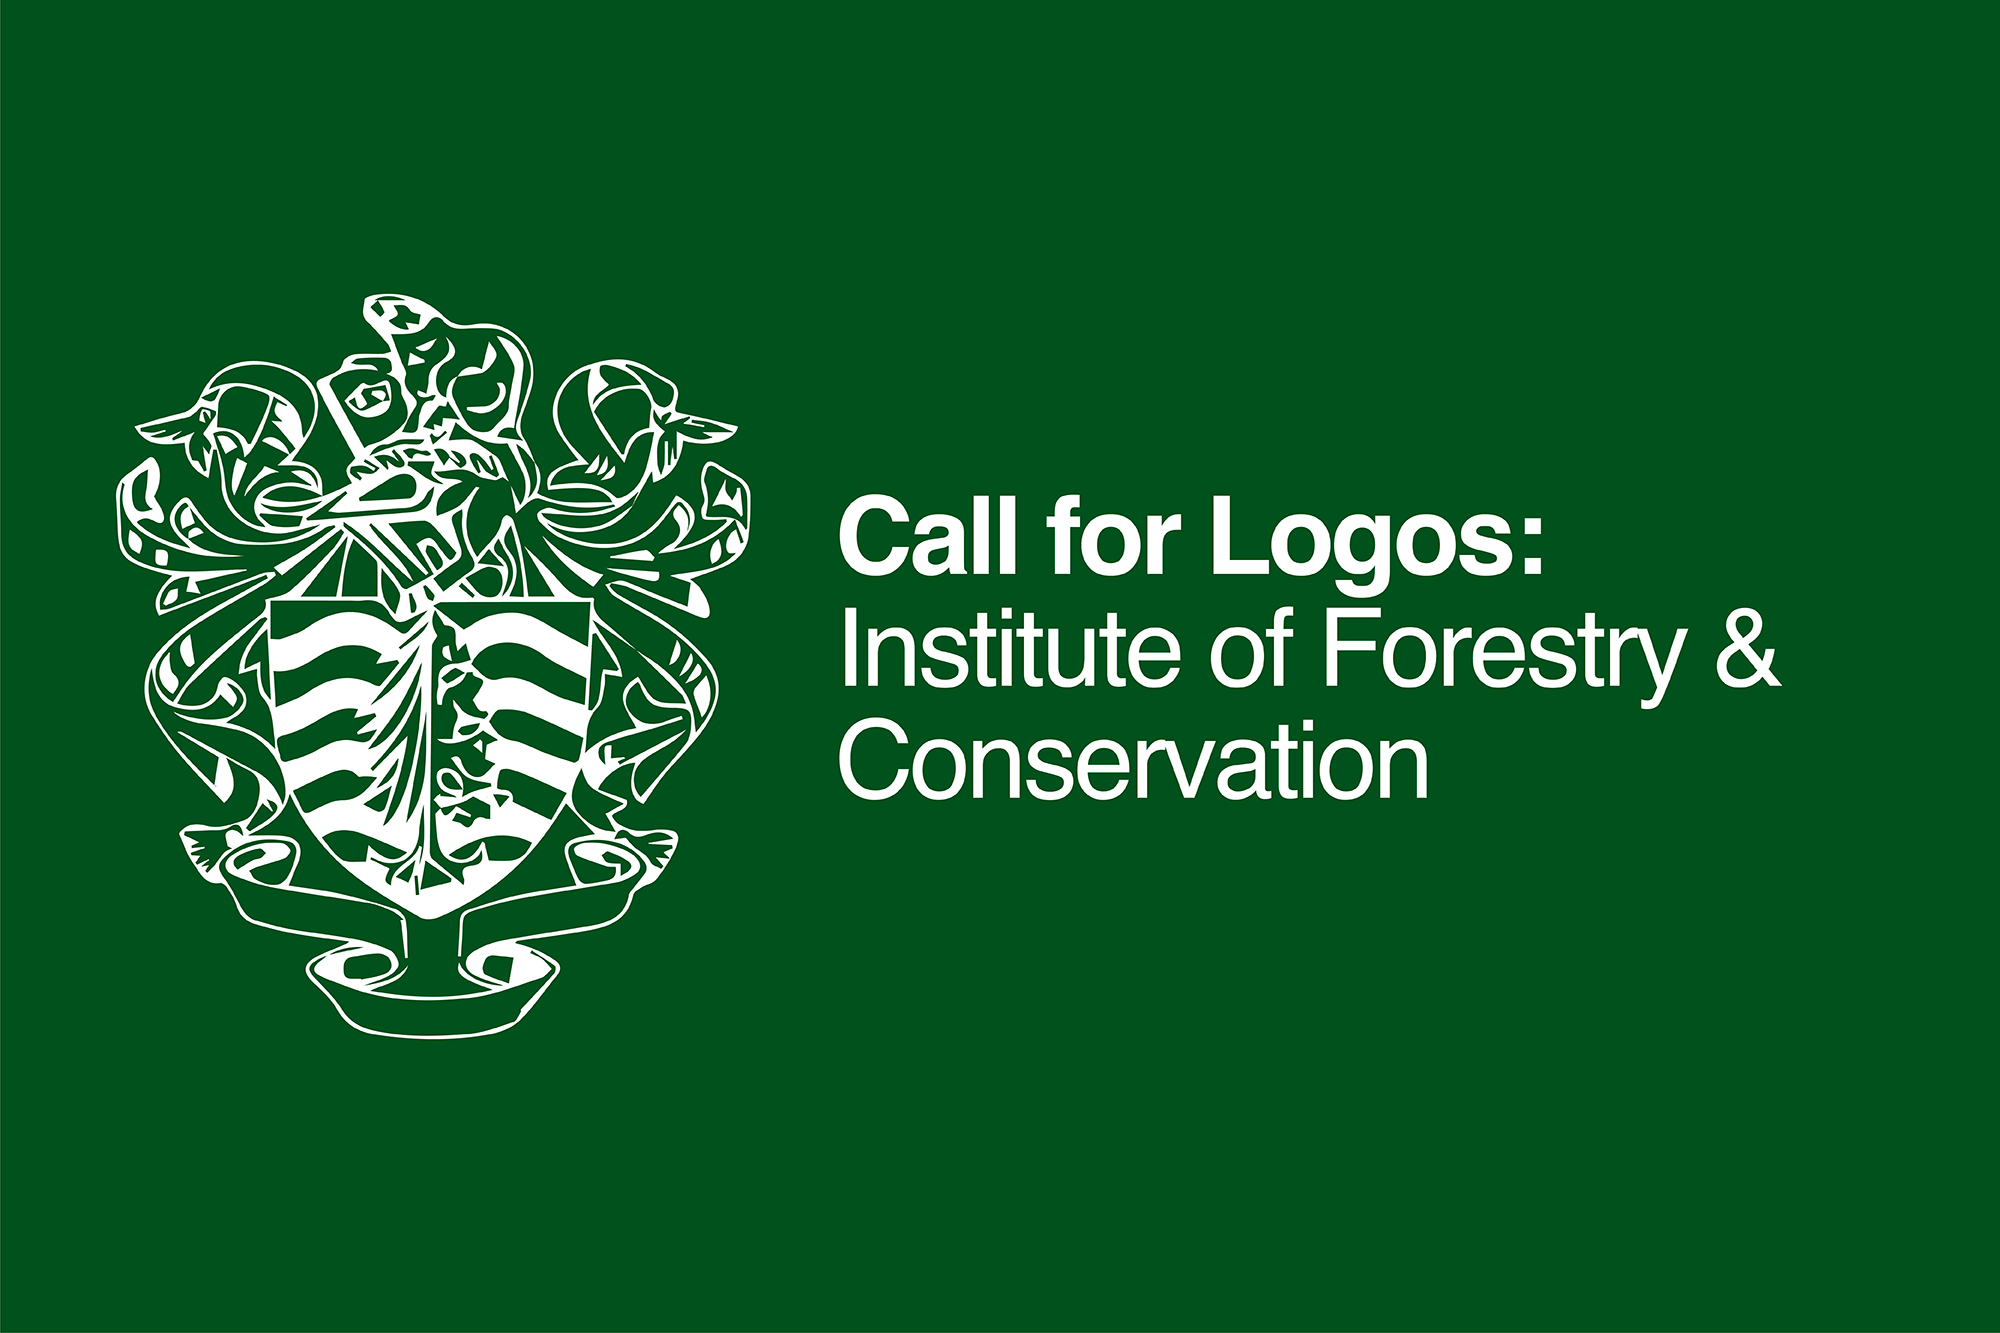 Call for Logos: Institute of Forestry and Conservation